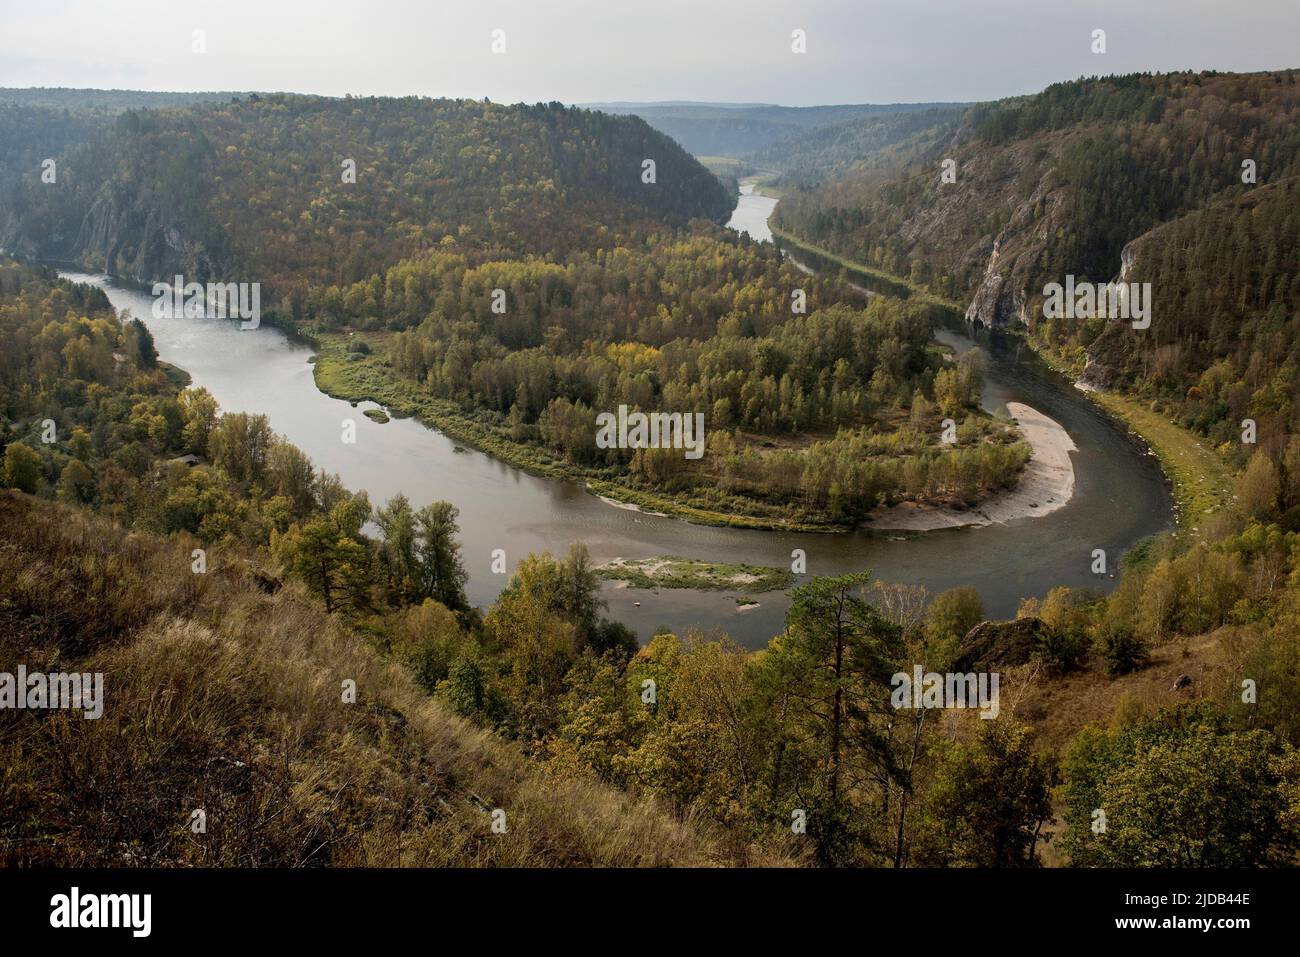 Bend of the river Belaya, viewed from the mountain Sarycuskan in which Shulgan-Tash (Kapova) cave is located; Russia Stock Photo